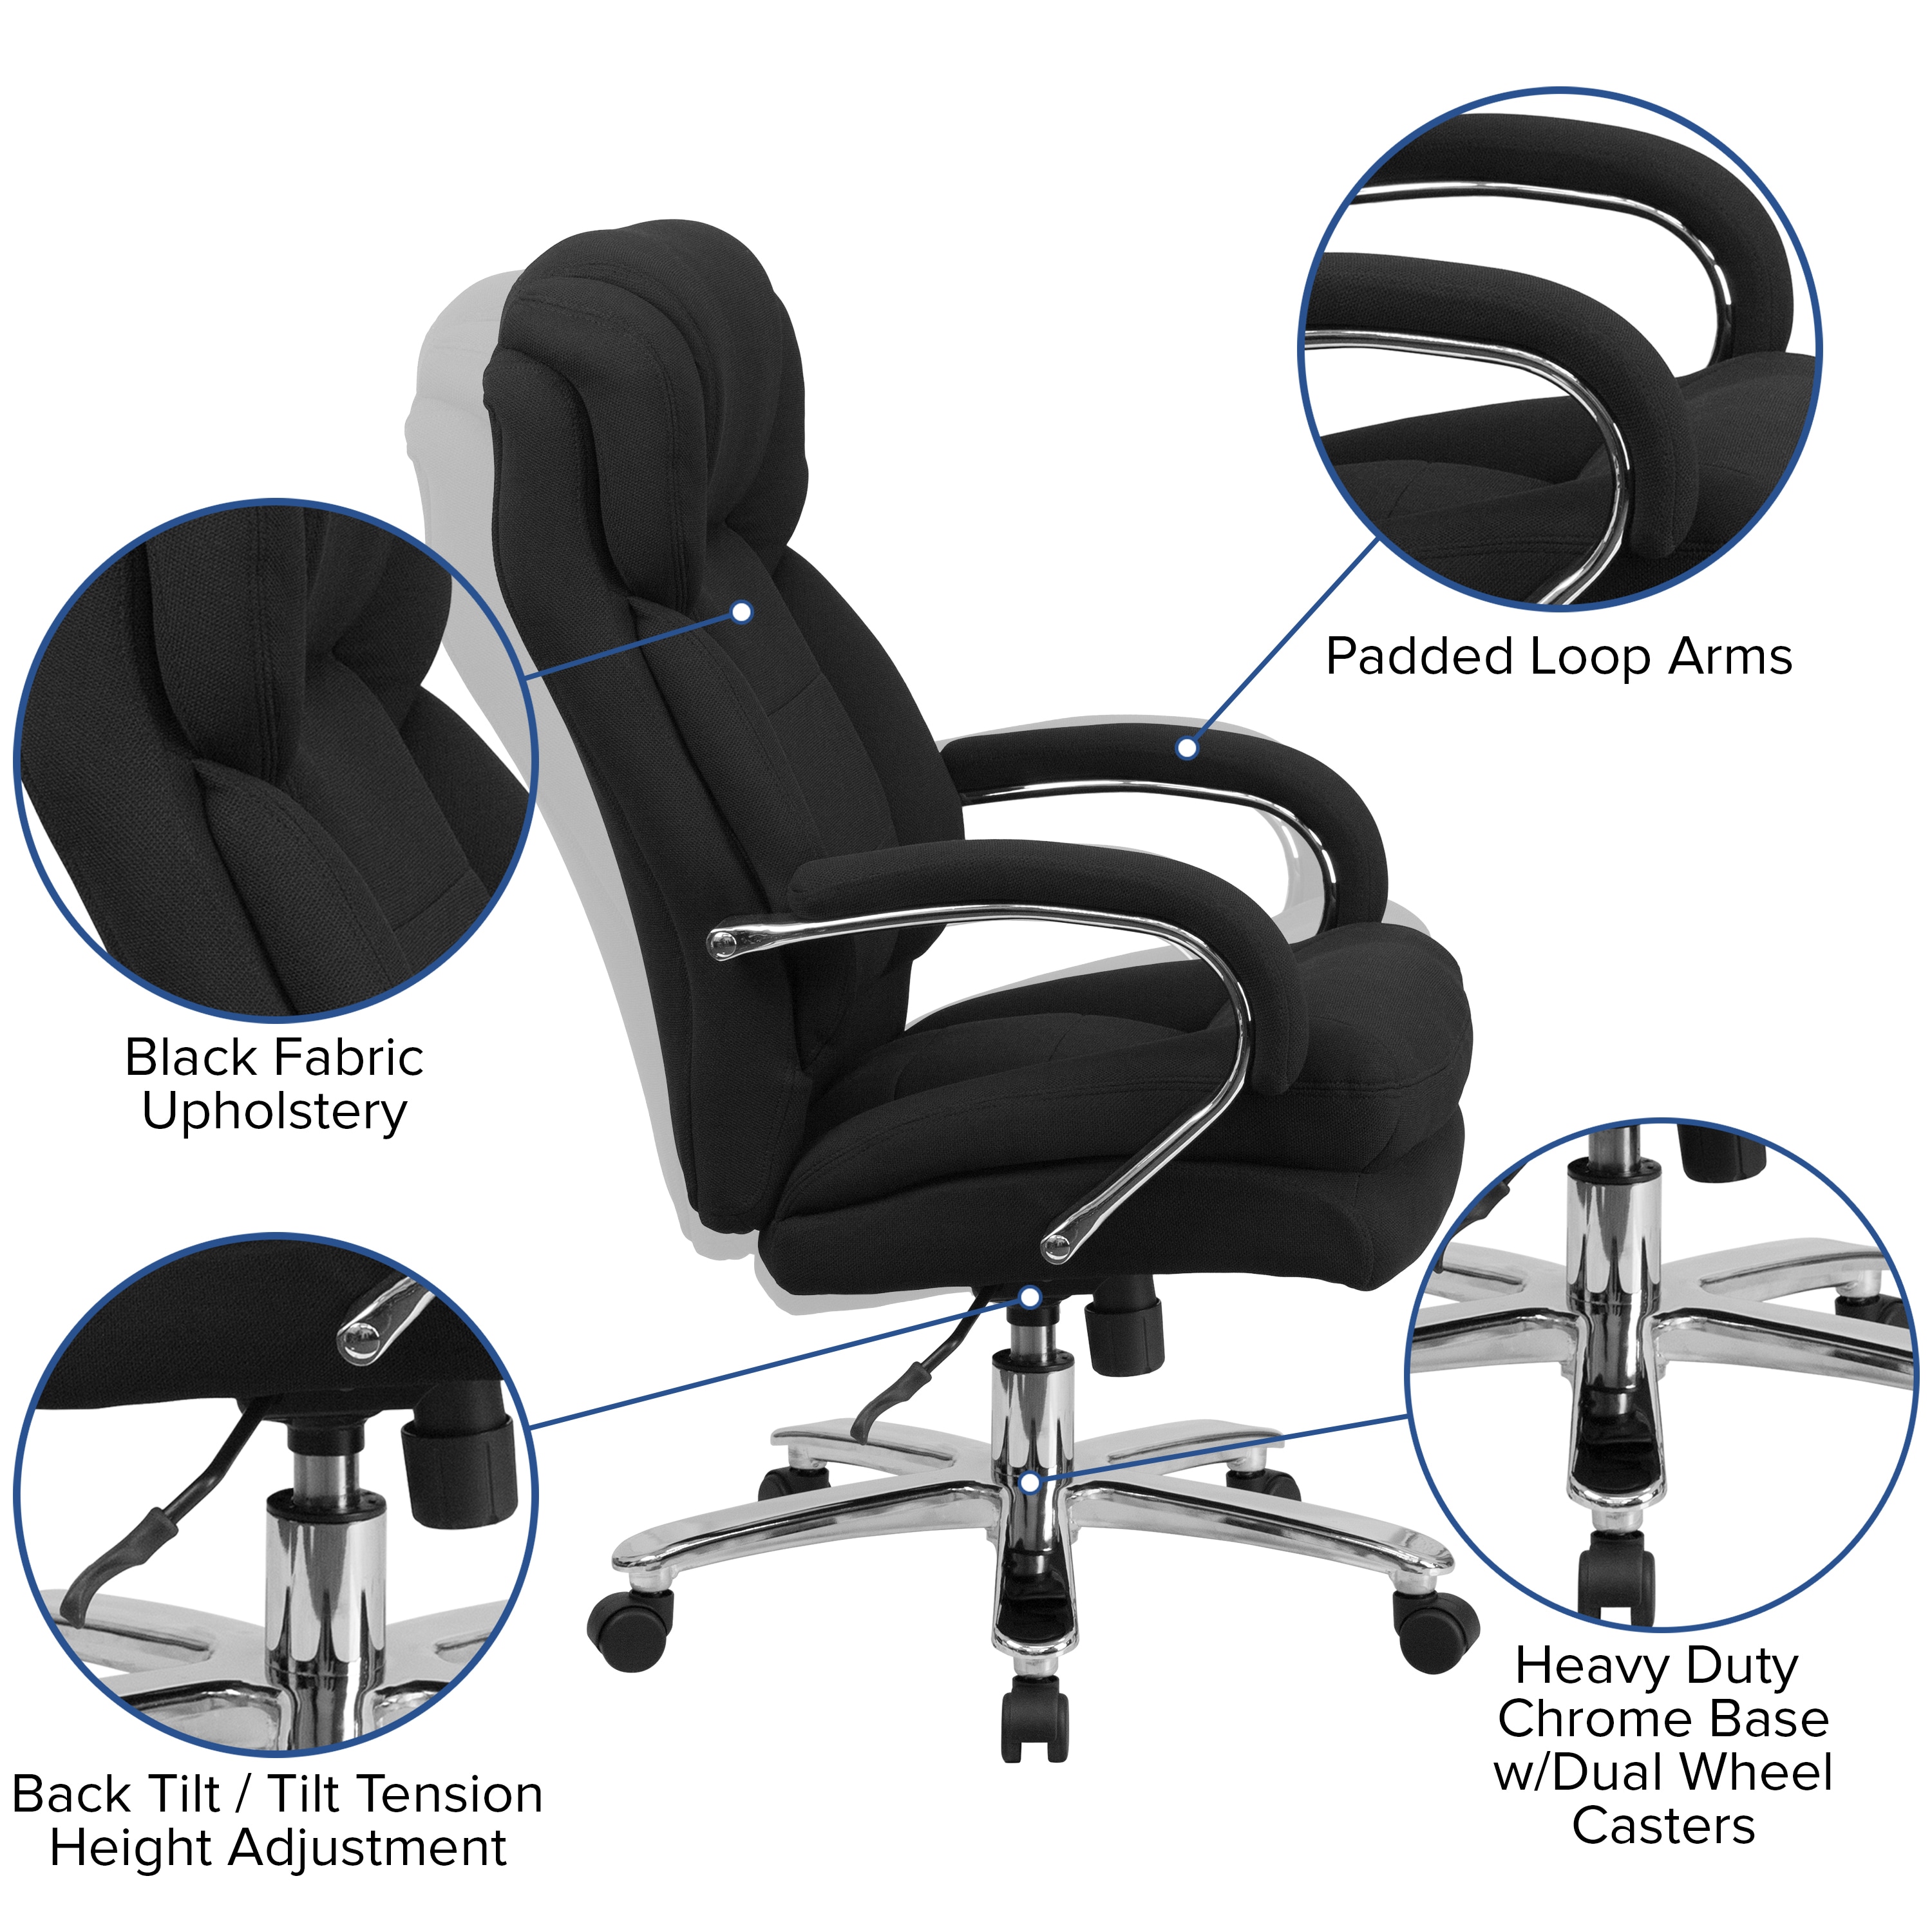 Big & Tall Fabric Office Chair with Lumbar Support